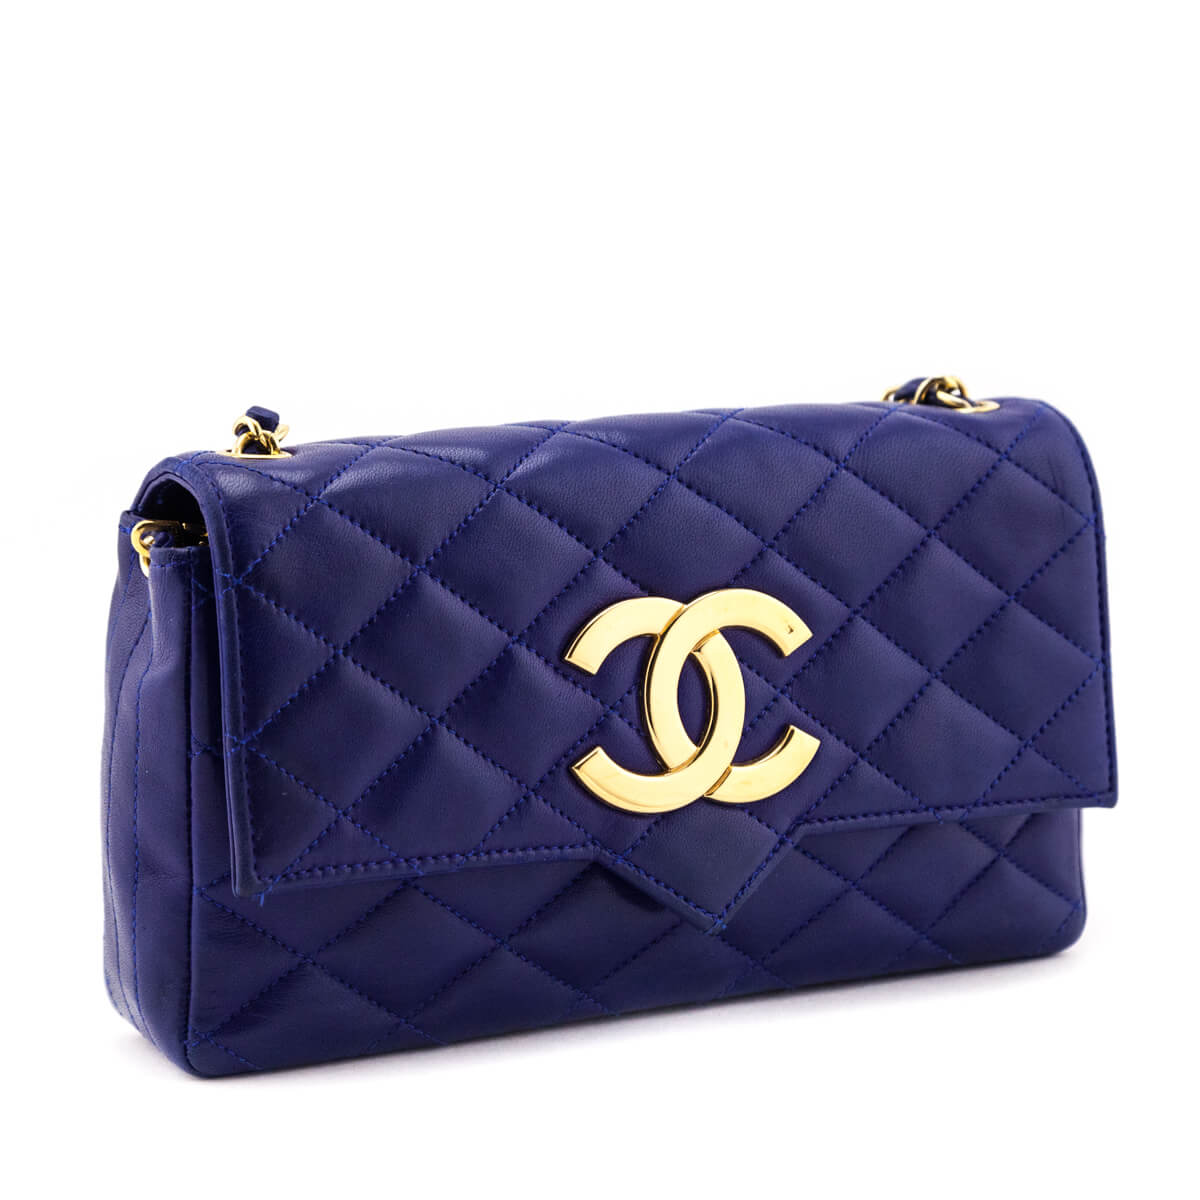 Chanel Limited Edition Briefcase & Mini Bags. Receipt/Direct Drop-Off  Included.